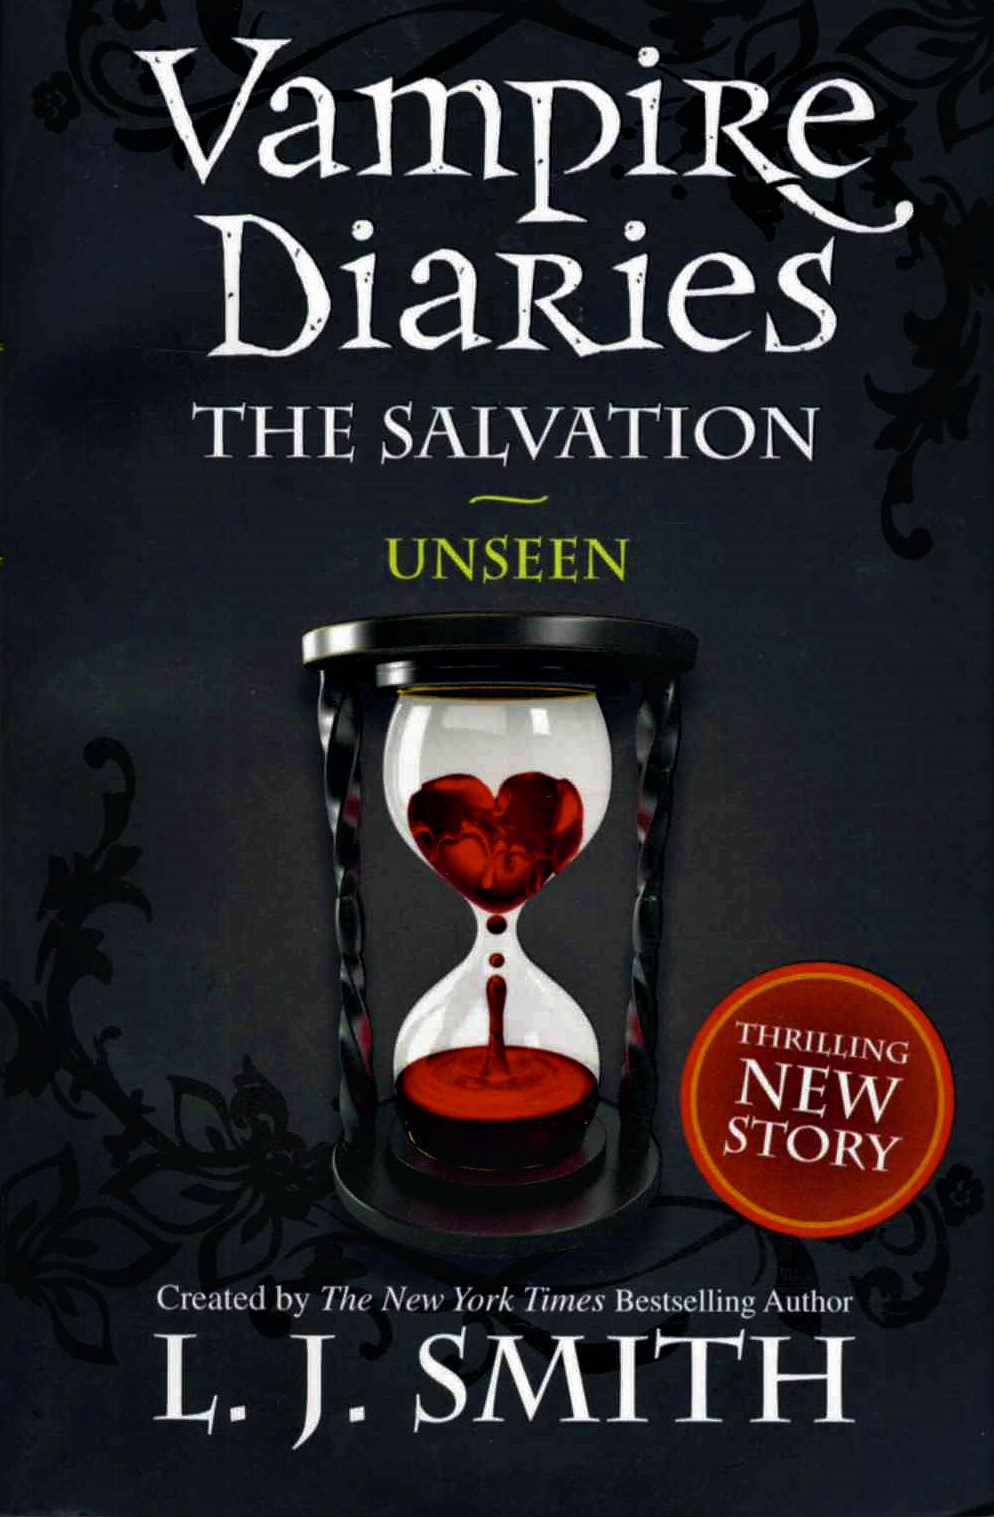 The Vampire Diaries: The Salvation. Unseen